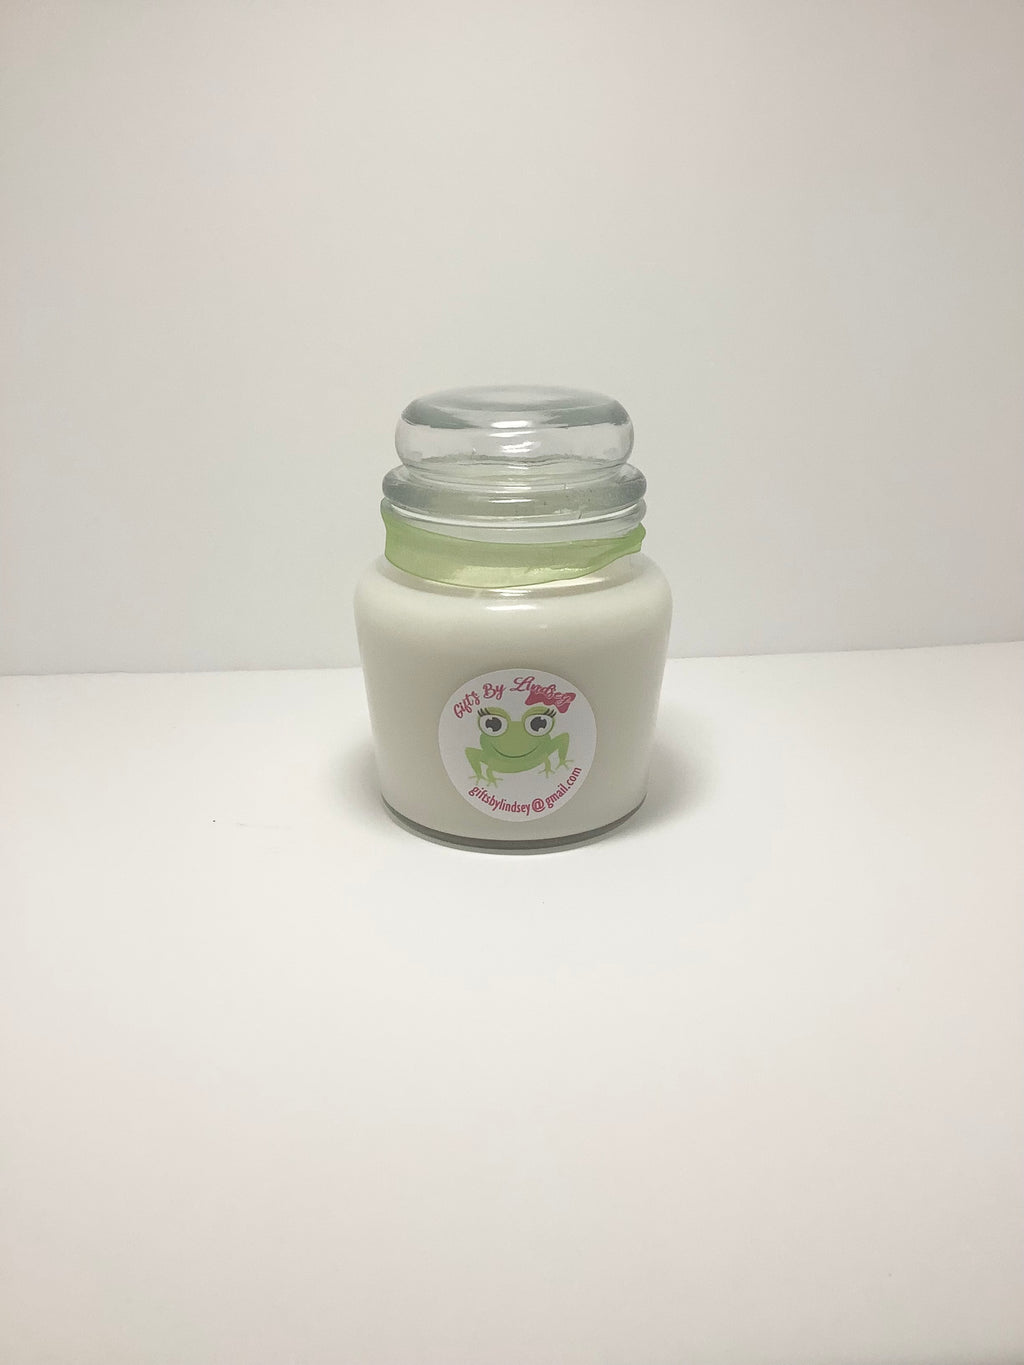 Jasmine and honeysuckle soy candle